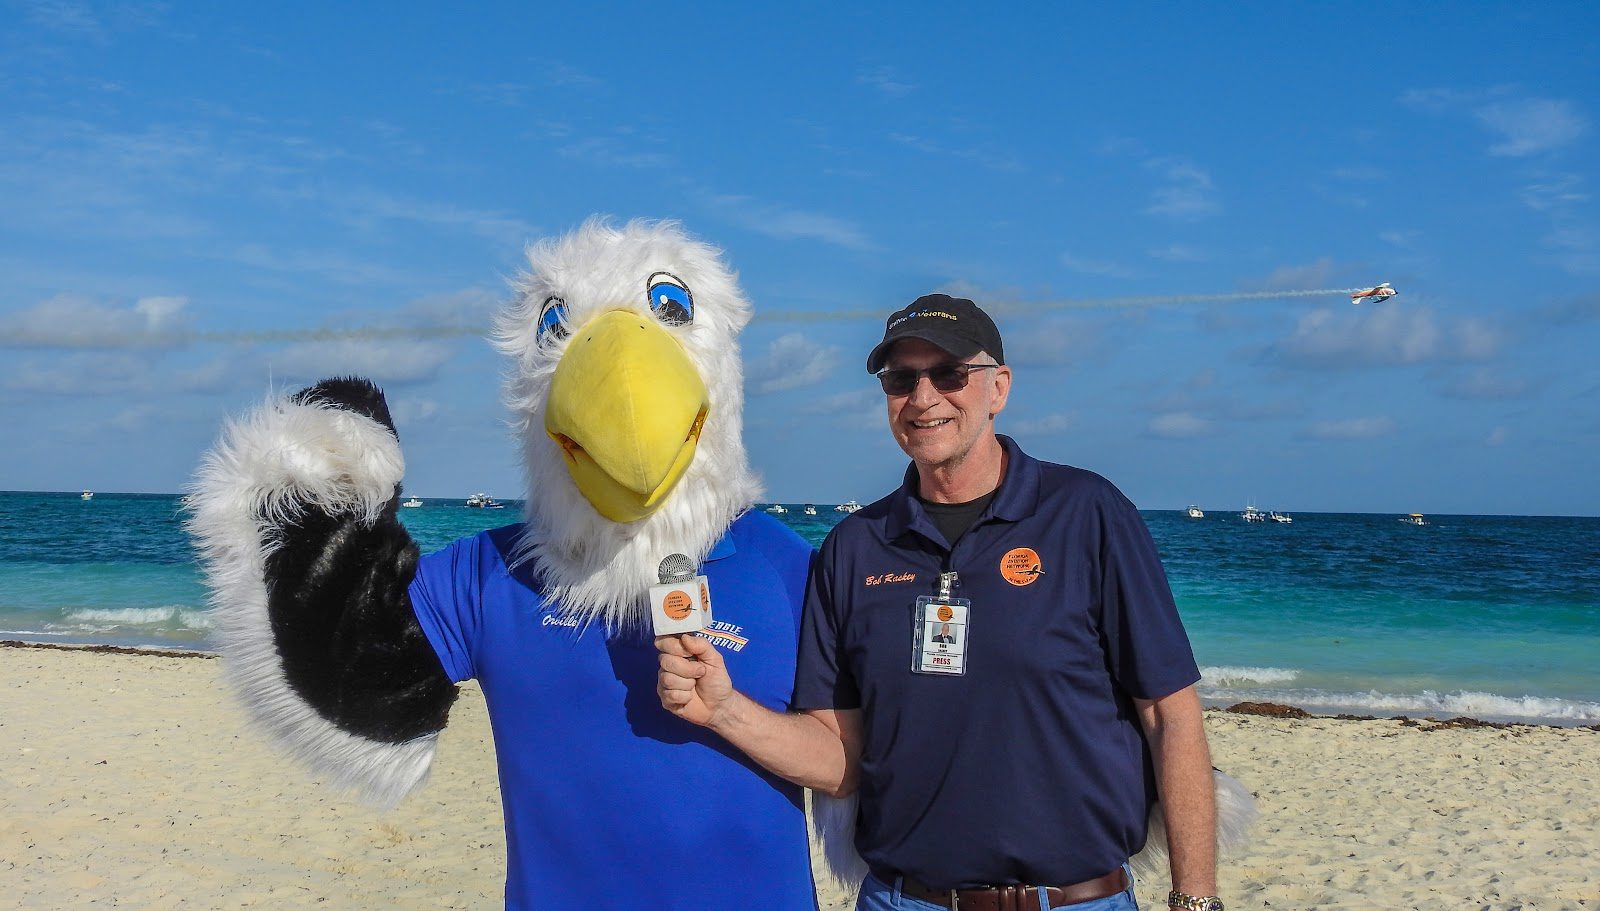 A man standing next to an eagle on the beach